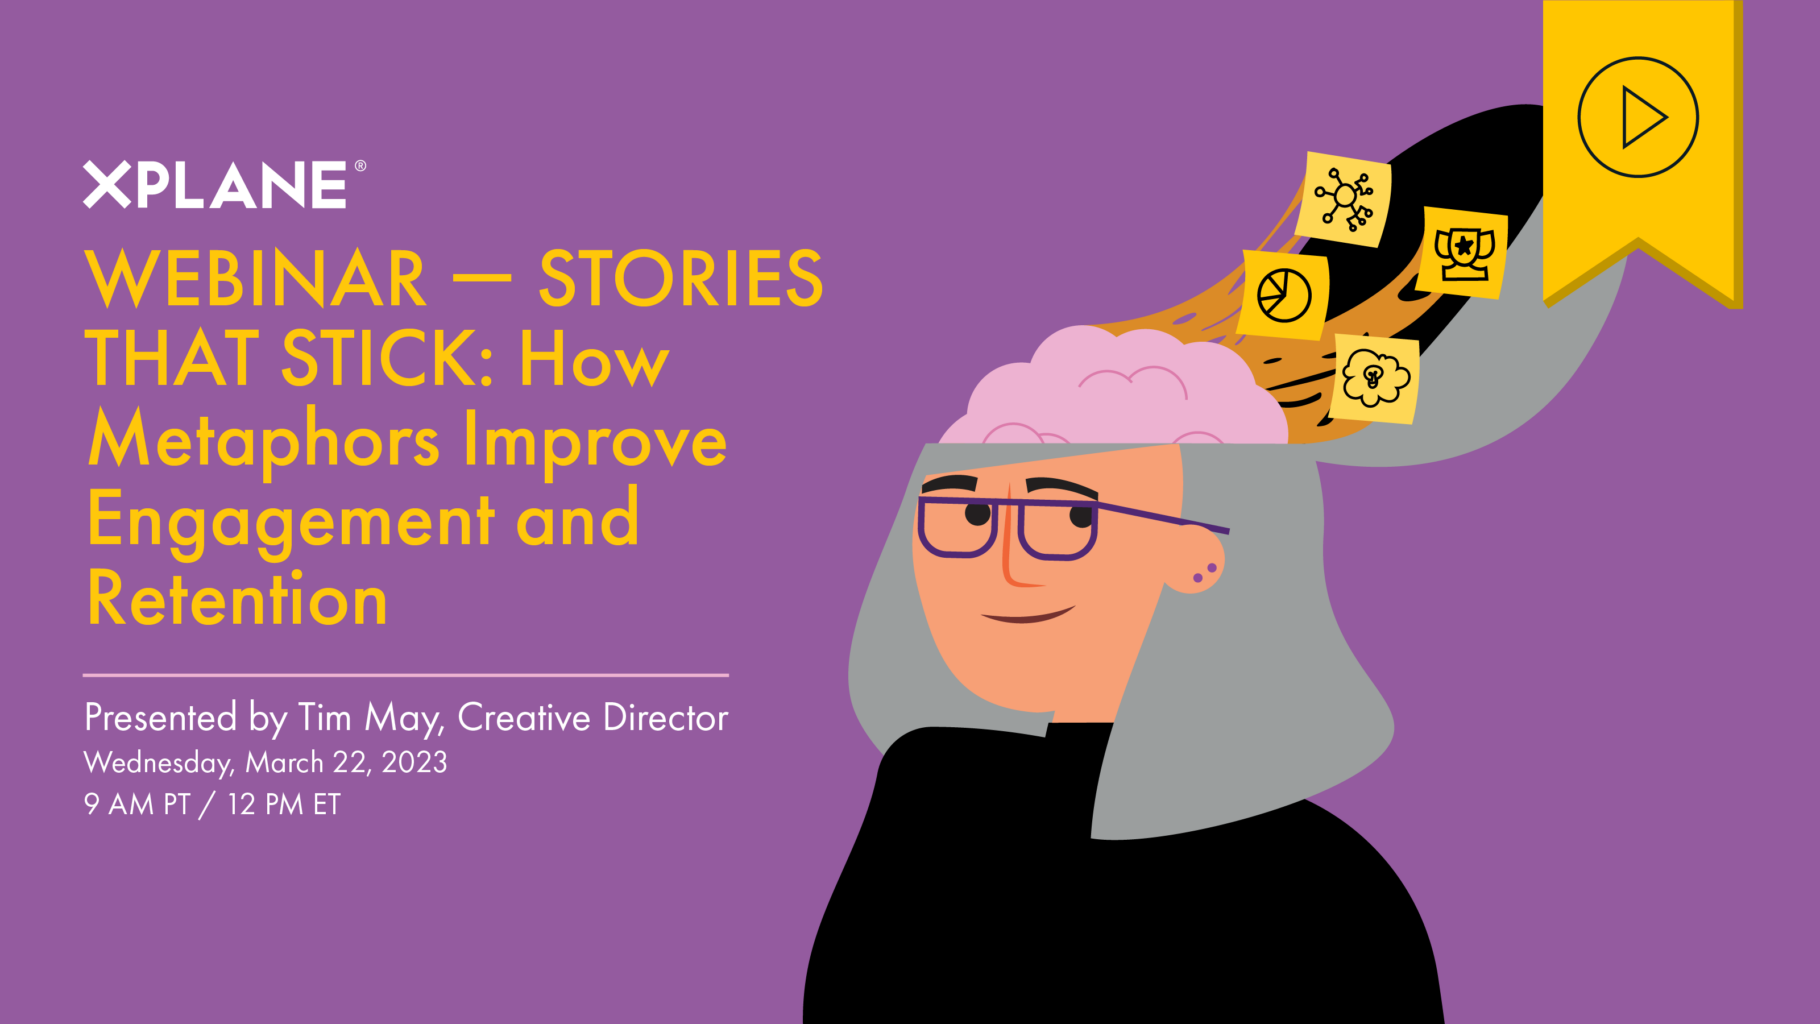 On the right, a grinning person with glasses and grey hair has their head popped open, brain exposed. Several yellow sticky notes show a pie chart, org chart, light bulb in a thought bubble, and a trophy. A sticky orange honey connects the sticky notes to the person's brain. On the left text reads, “Webinar — Stories That Stick: How Metaphors Improve Engagement and Retention. Presented by Tim May. Wednesday, March 22 2023. 9am PT / 12pm ET.” A yellow tag with an icon of a video play button indicates that there is a recording of this webinar.